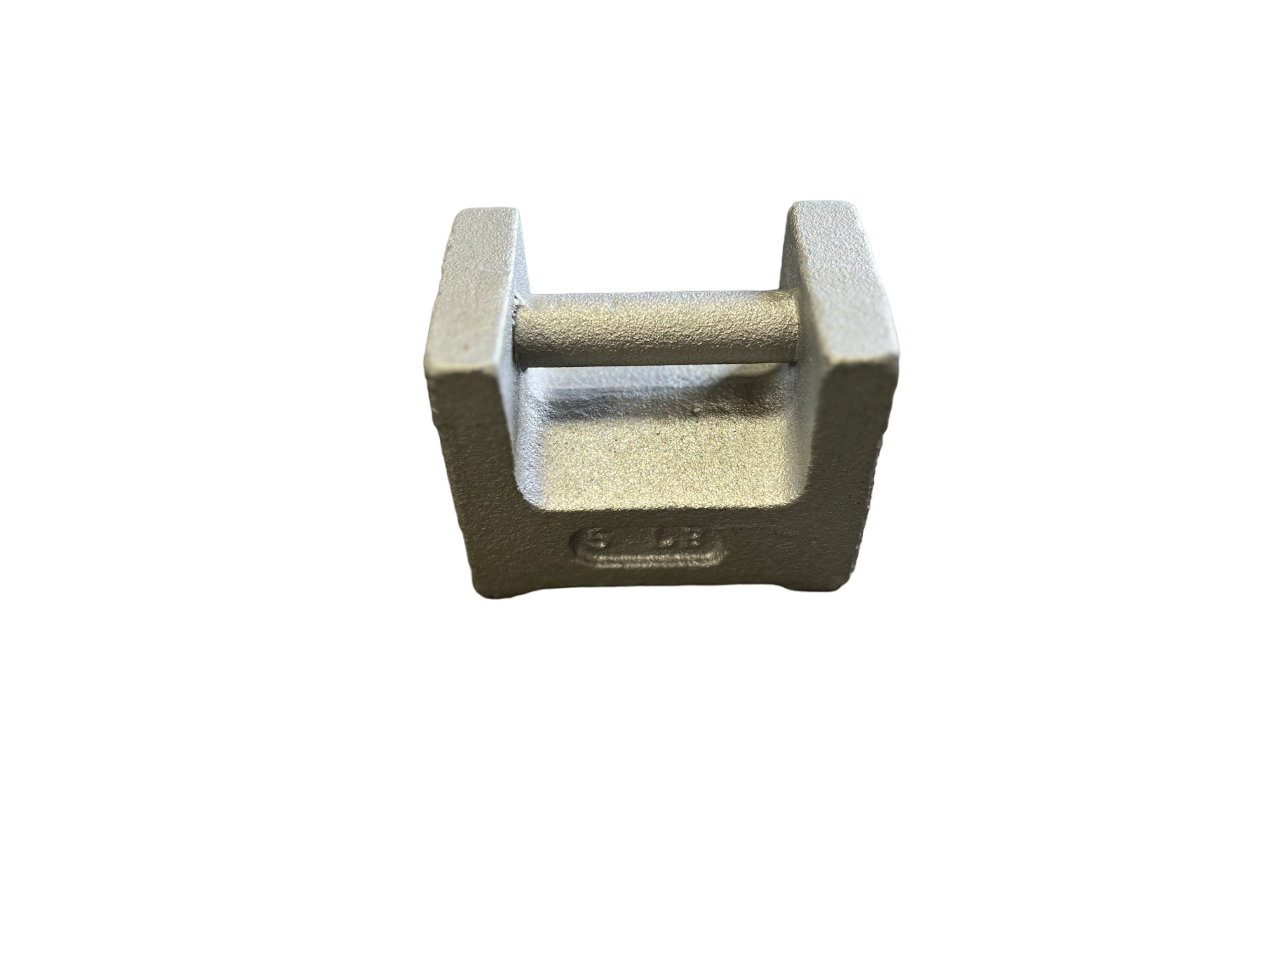 500 lb Calibration Weight - Prime USA Scales